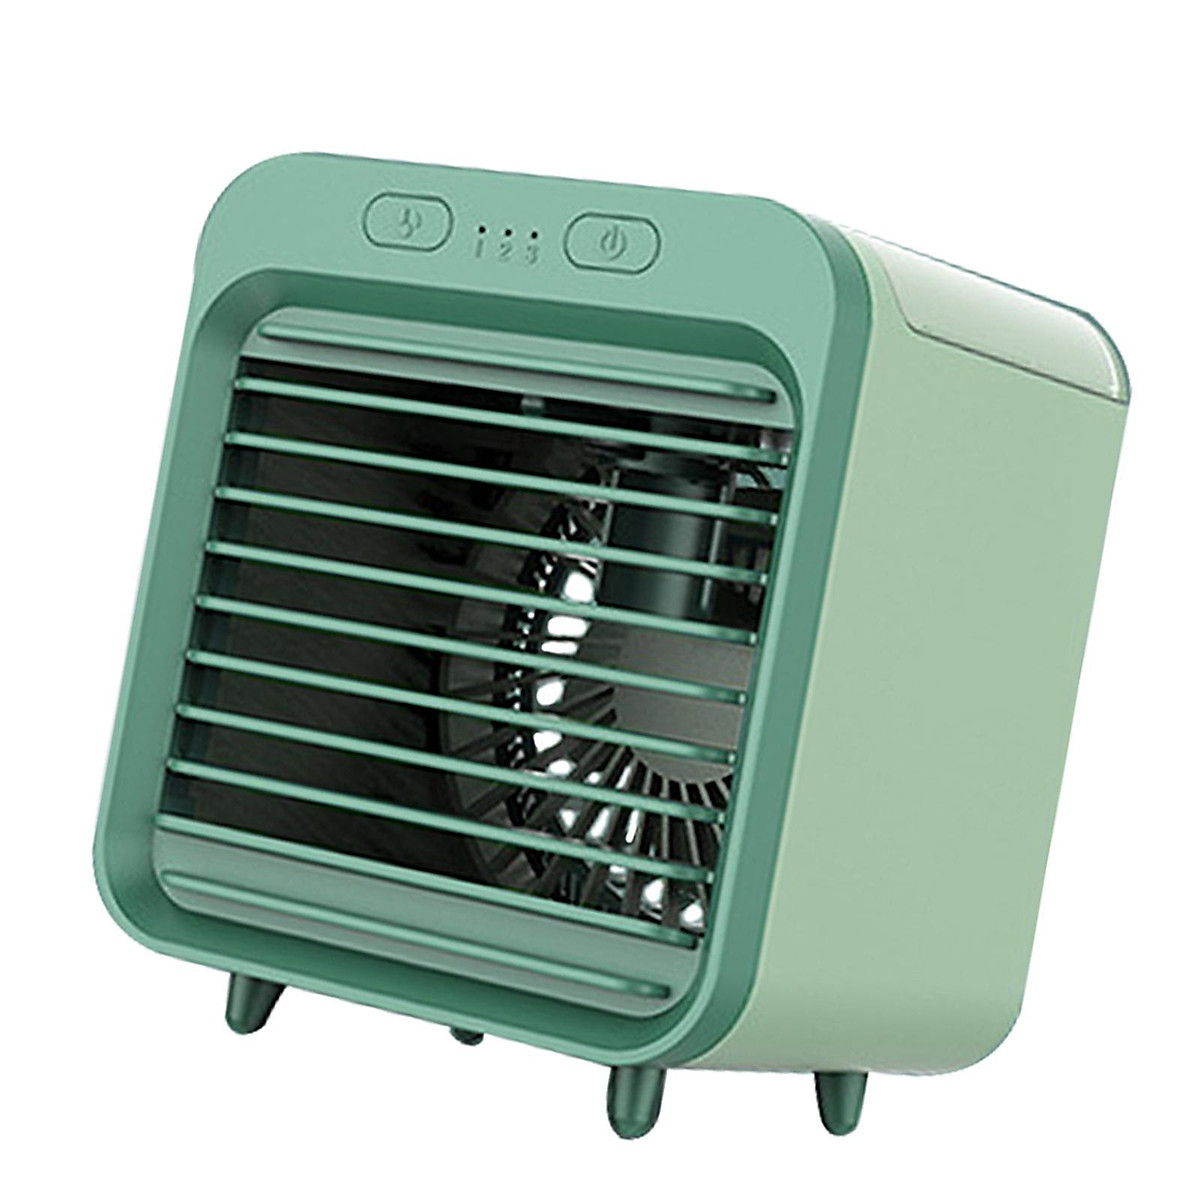 Mua Cooler Small Office Air Conditioner  tại Wonderland Global